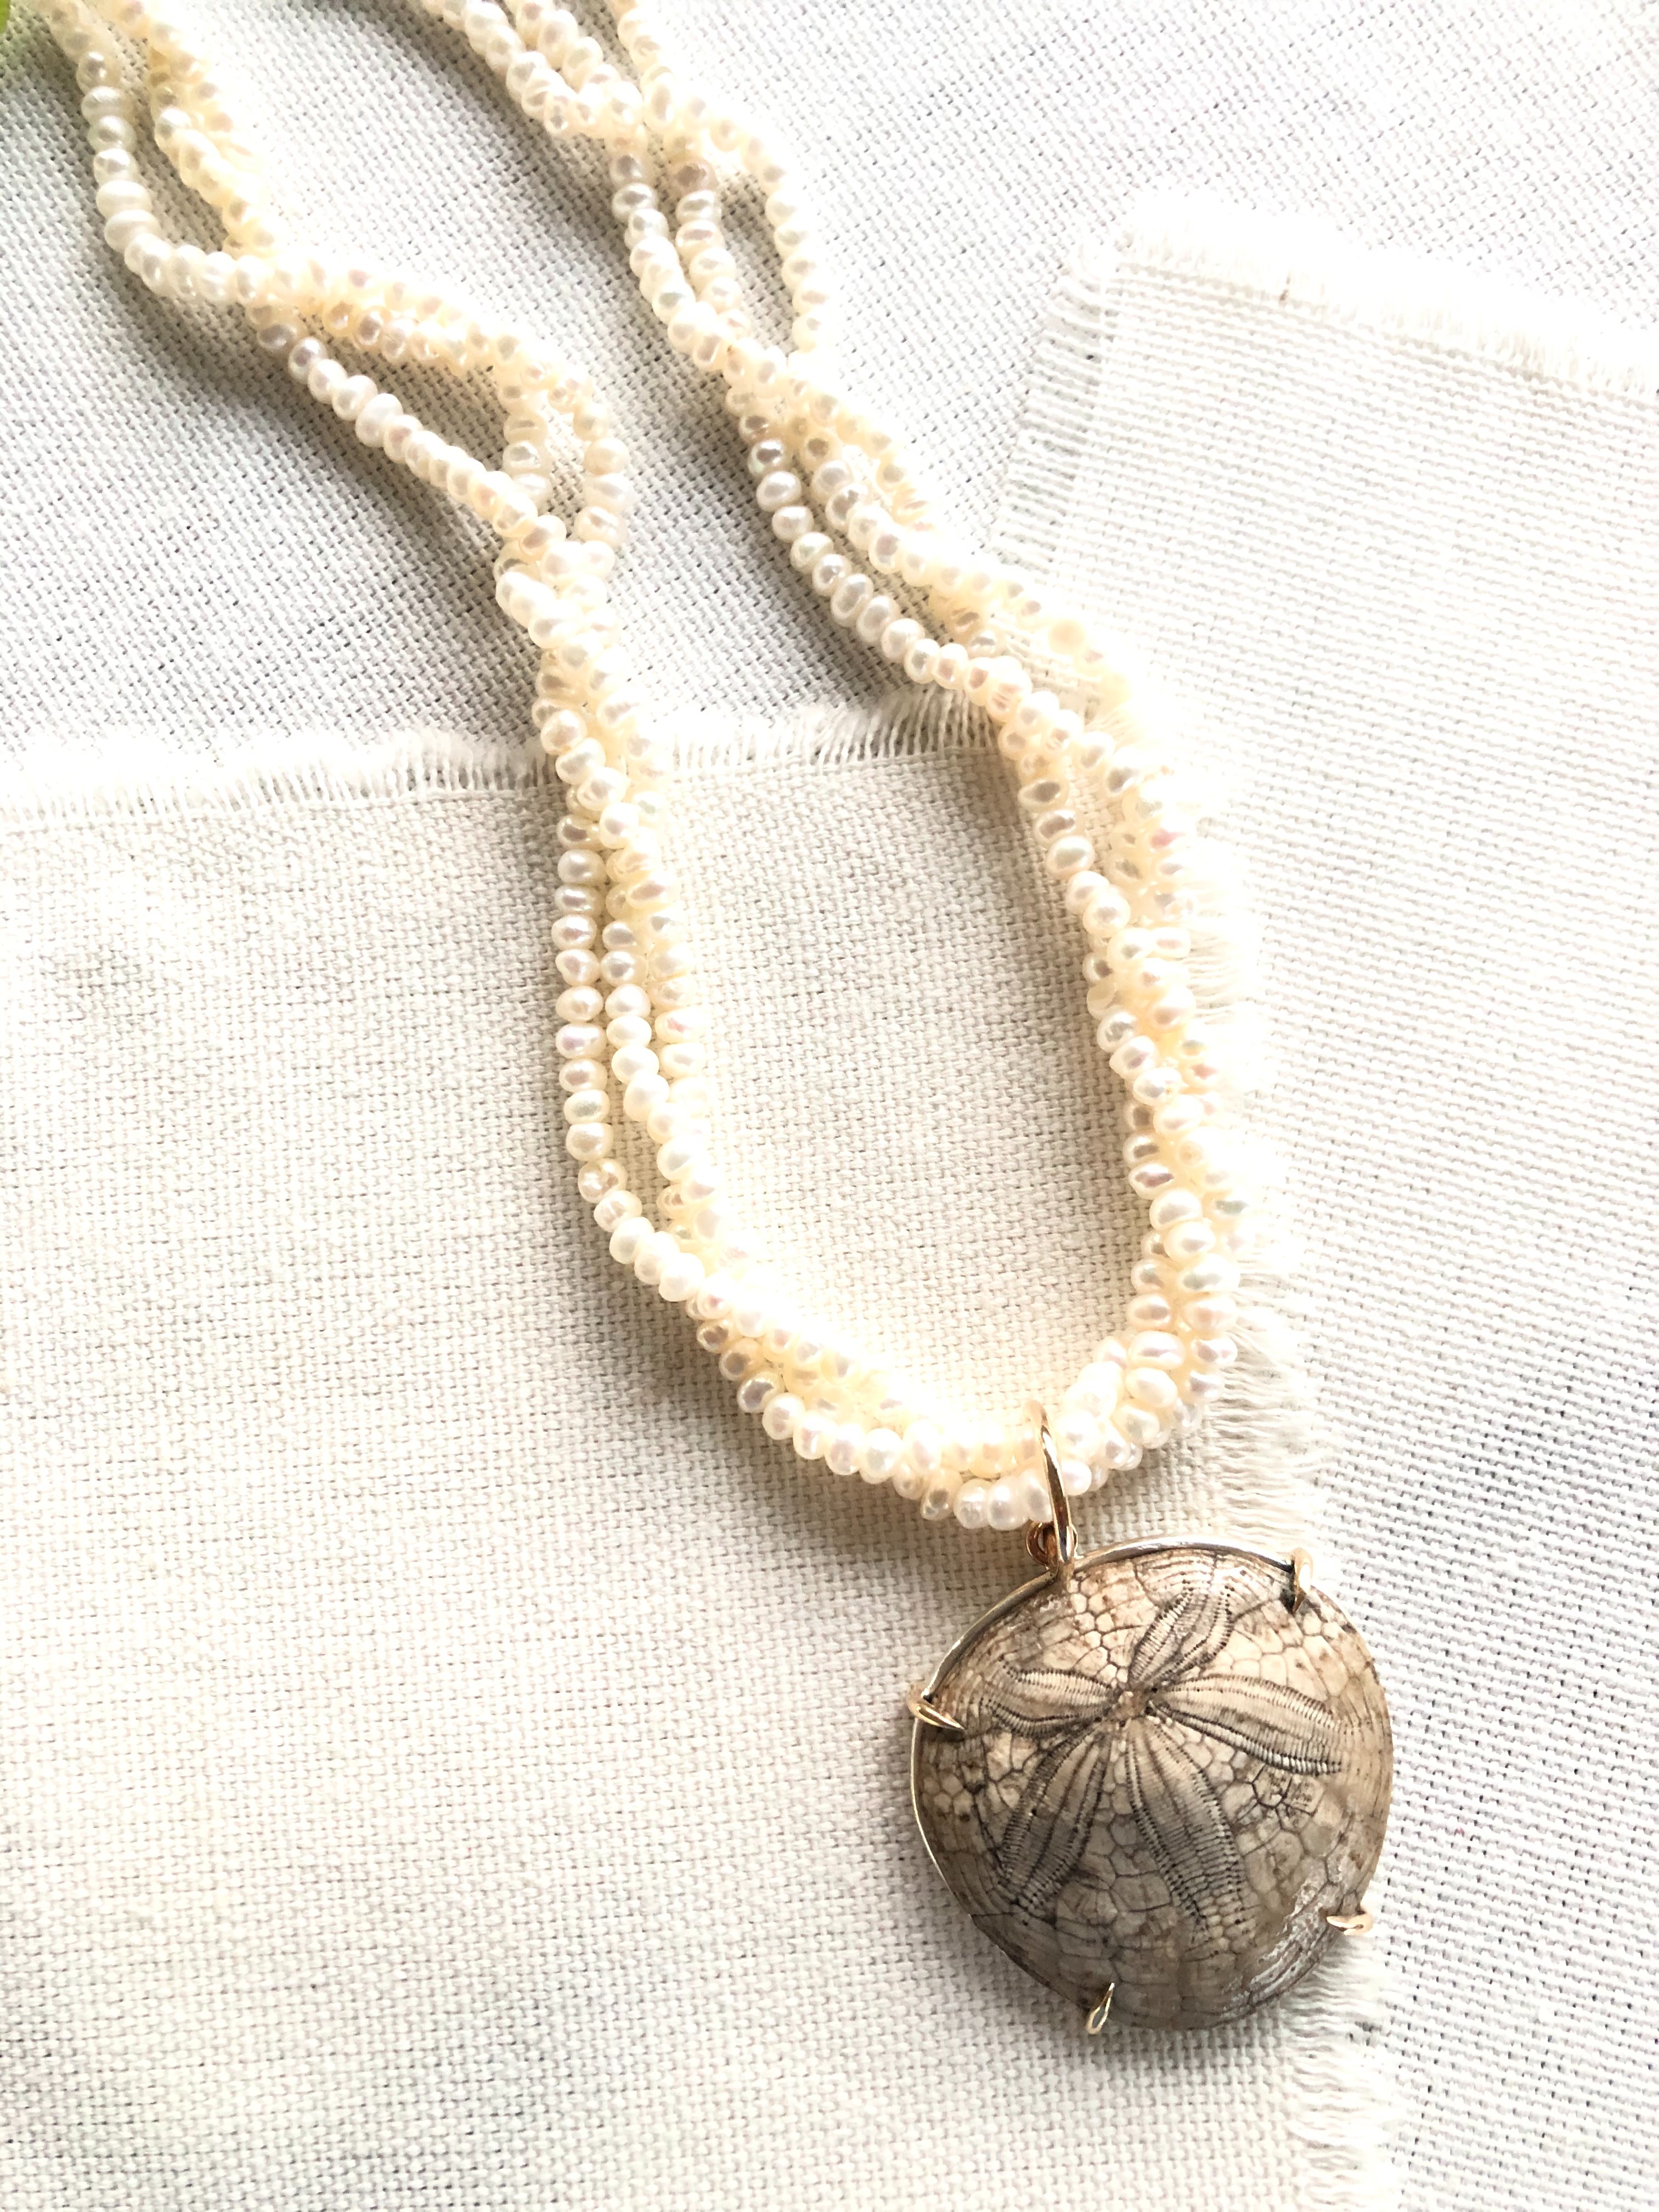 This is a one of a kind artisan made fossilized sand dollar on seed pearls necklace.